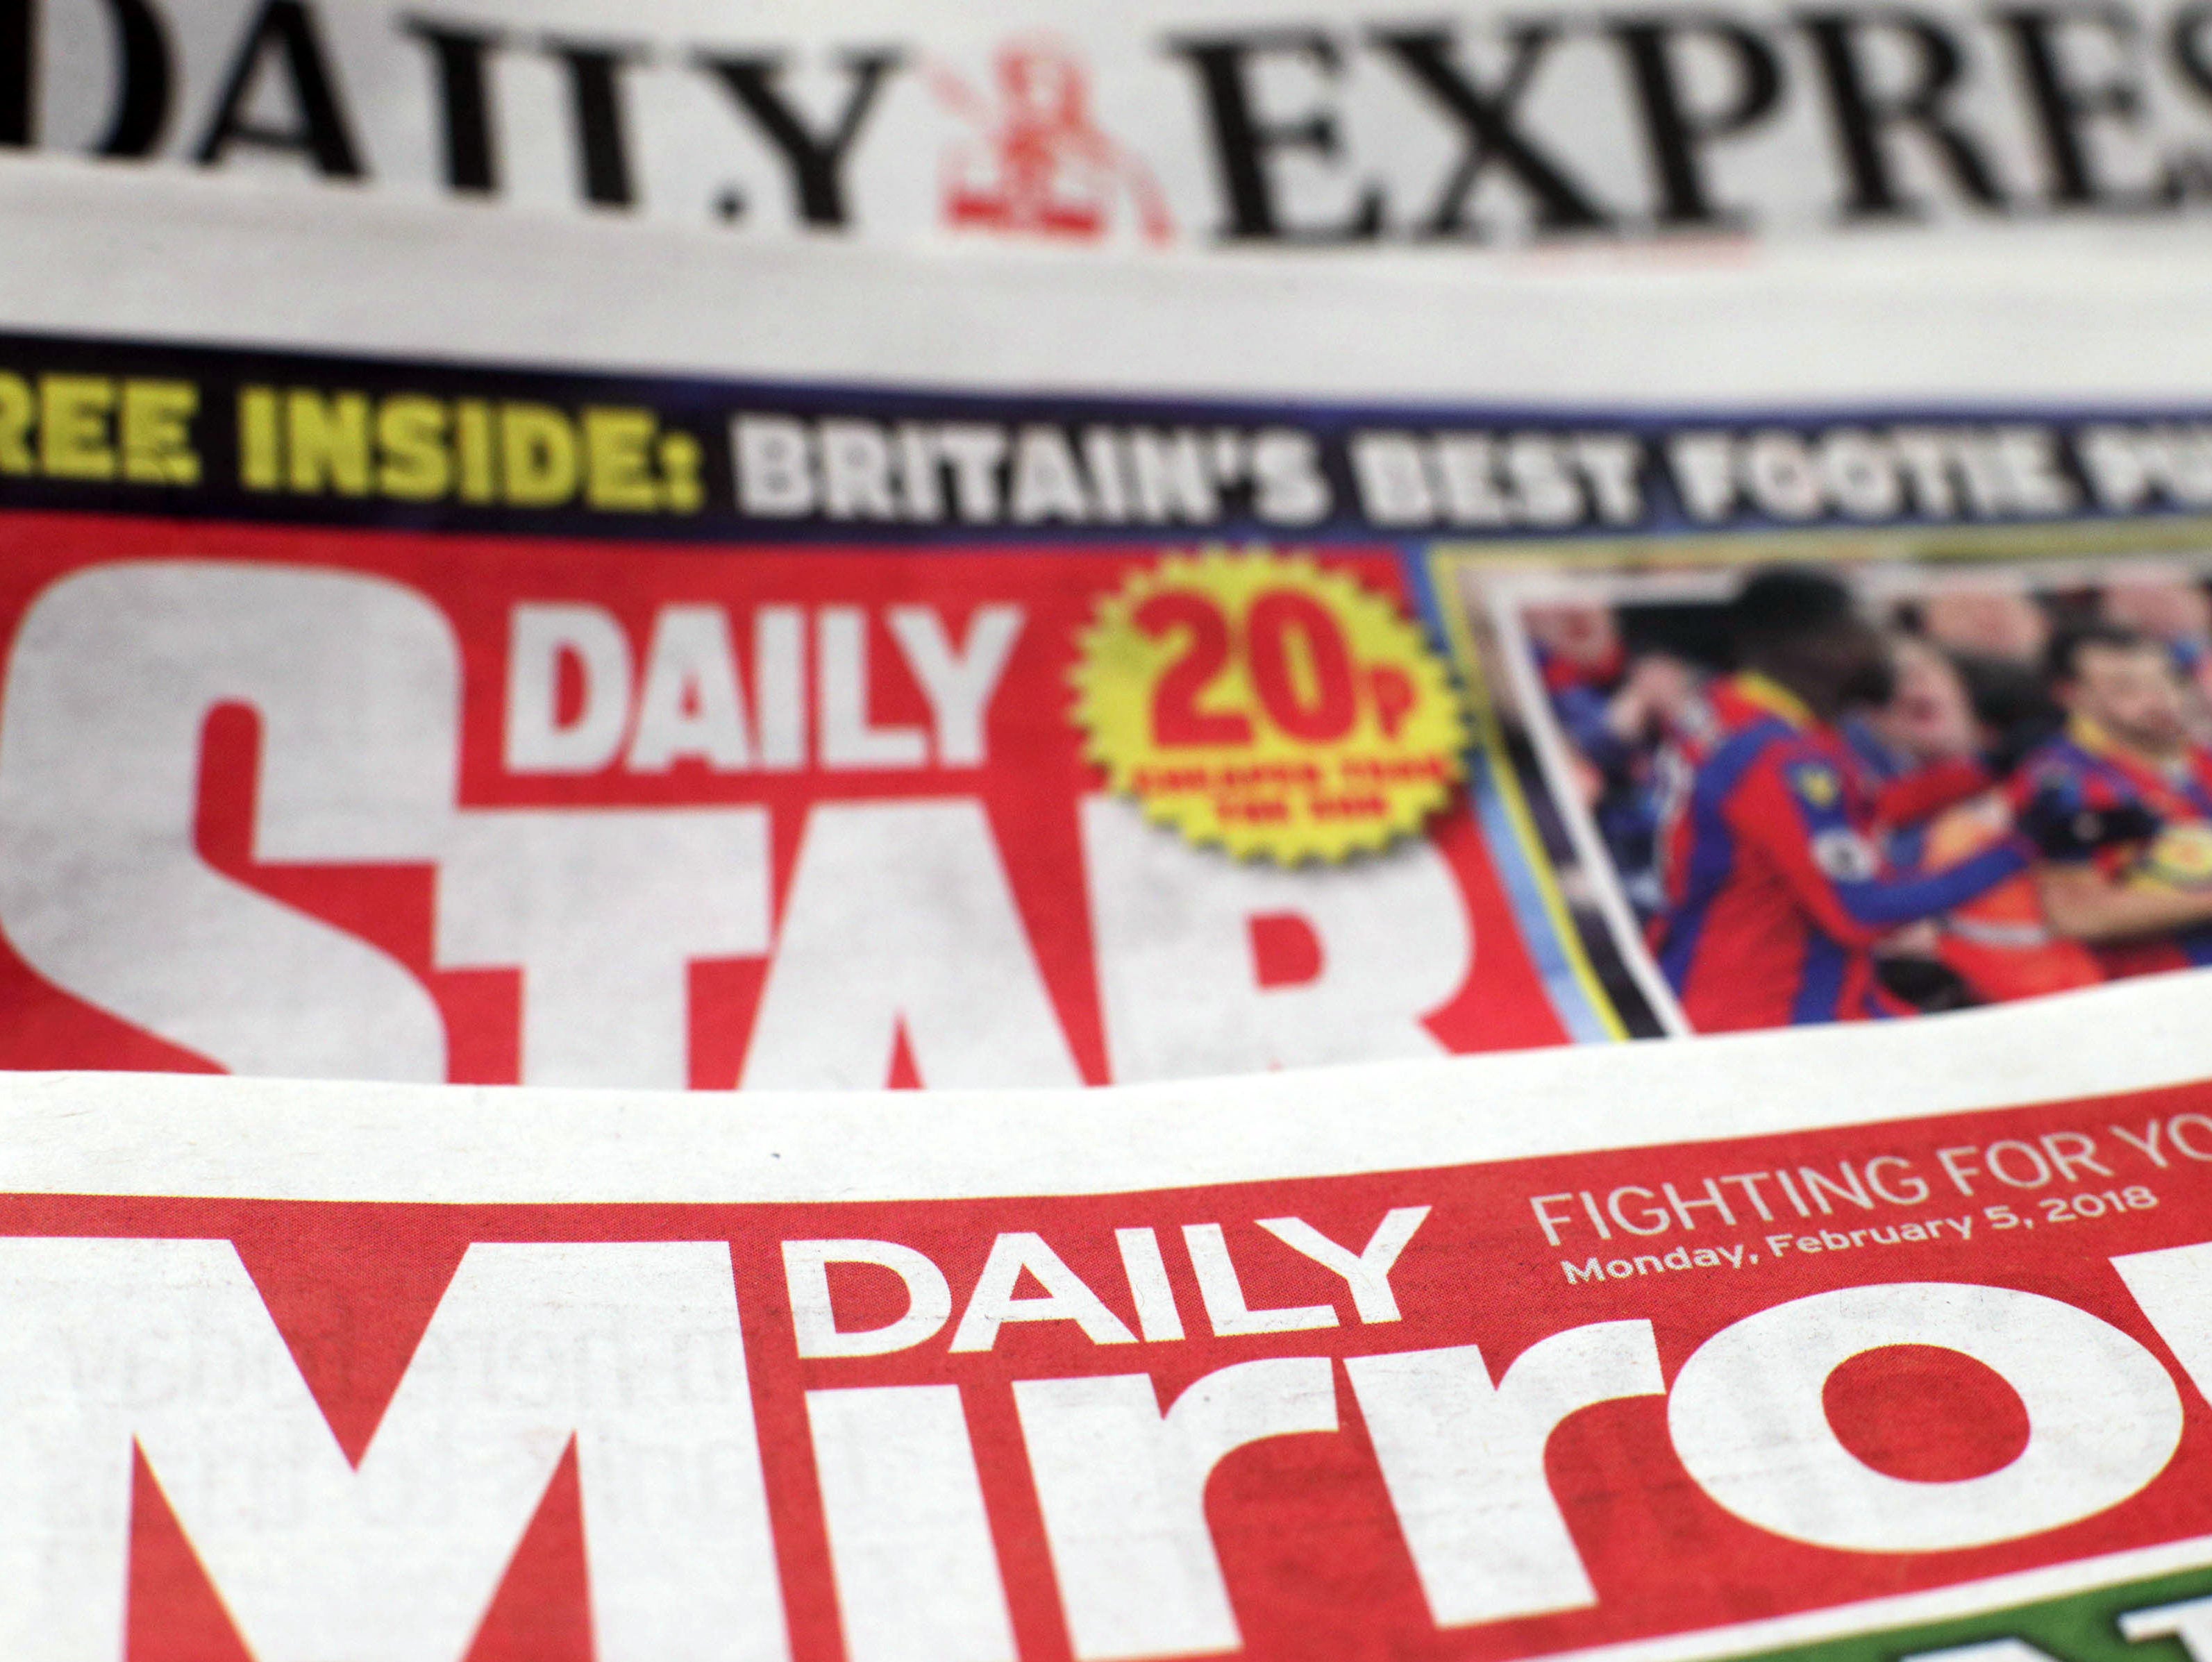 Trinity Mirror agrees £127m deal to buy Daily Express and Daily Star newspapers and celeb magazines